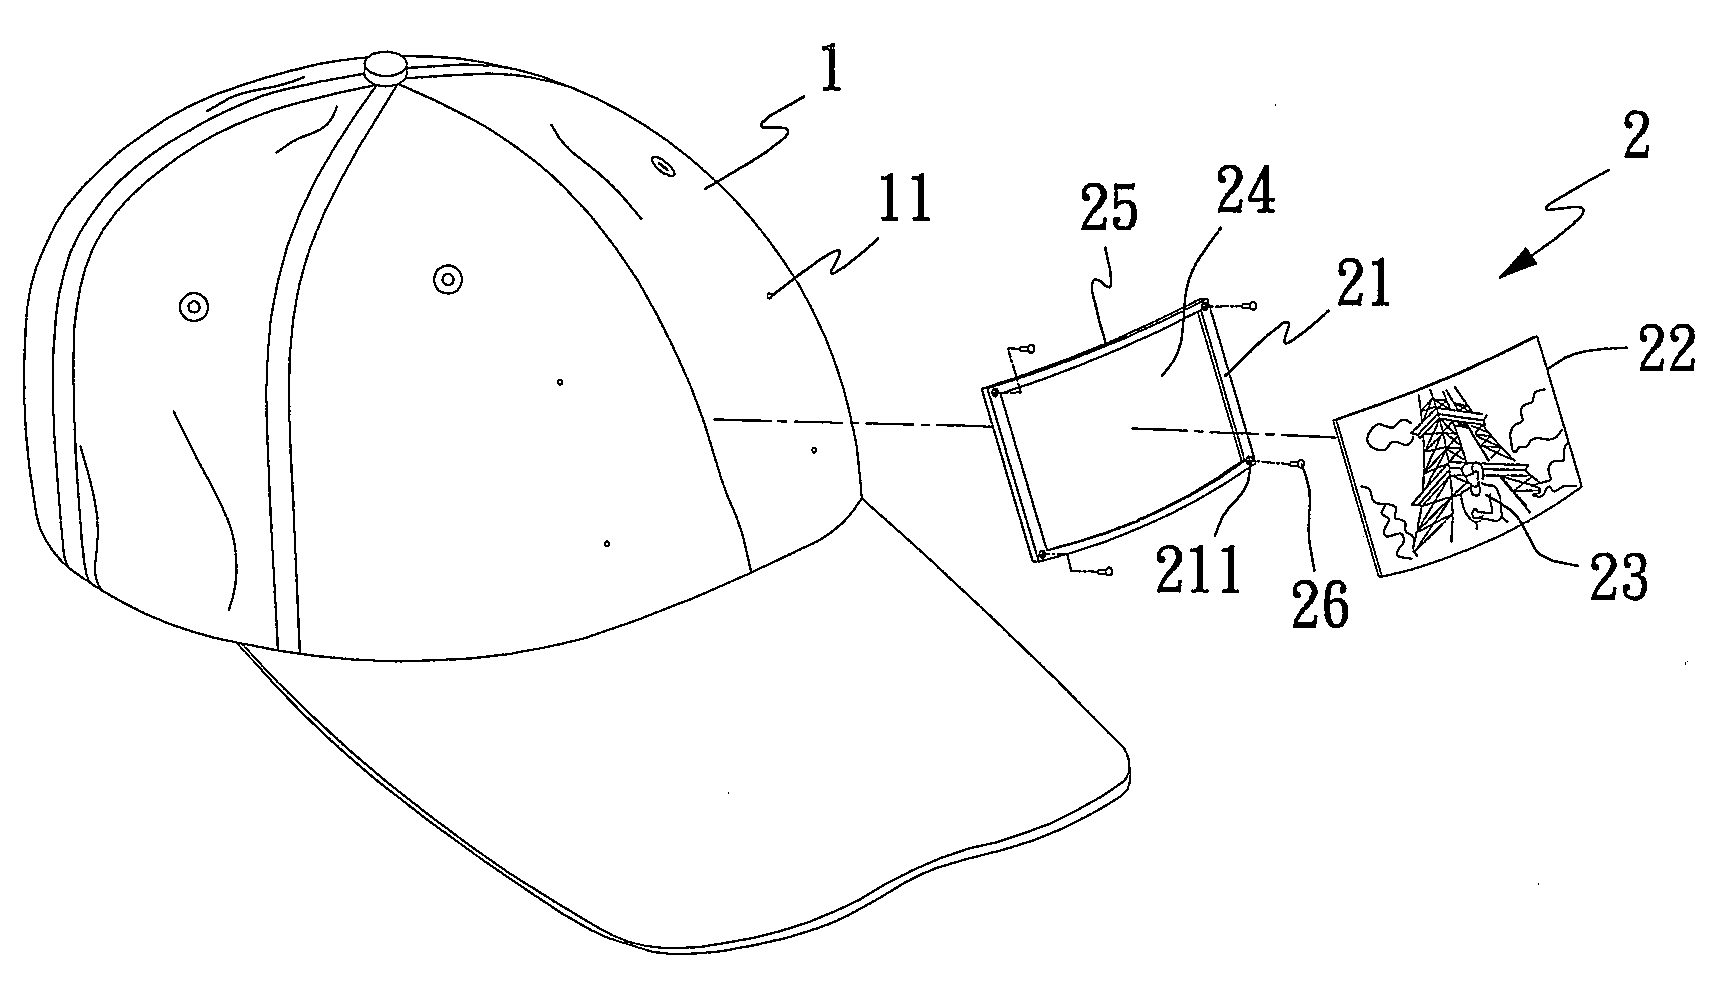 Badge structure of a portable item